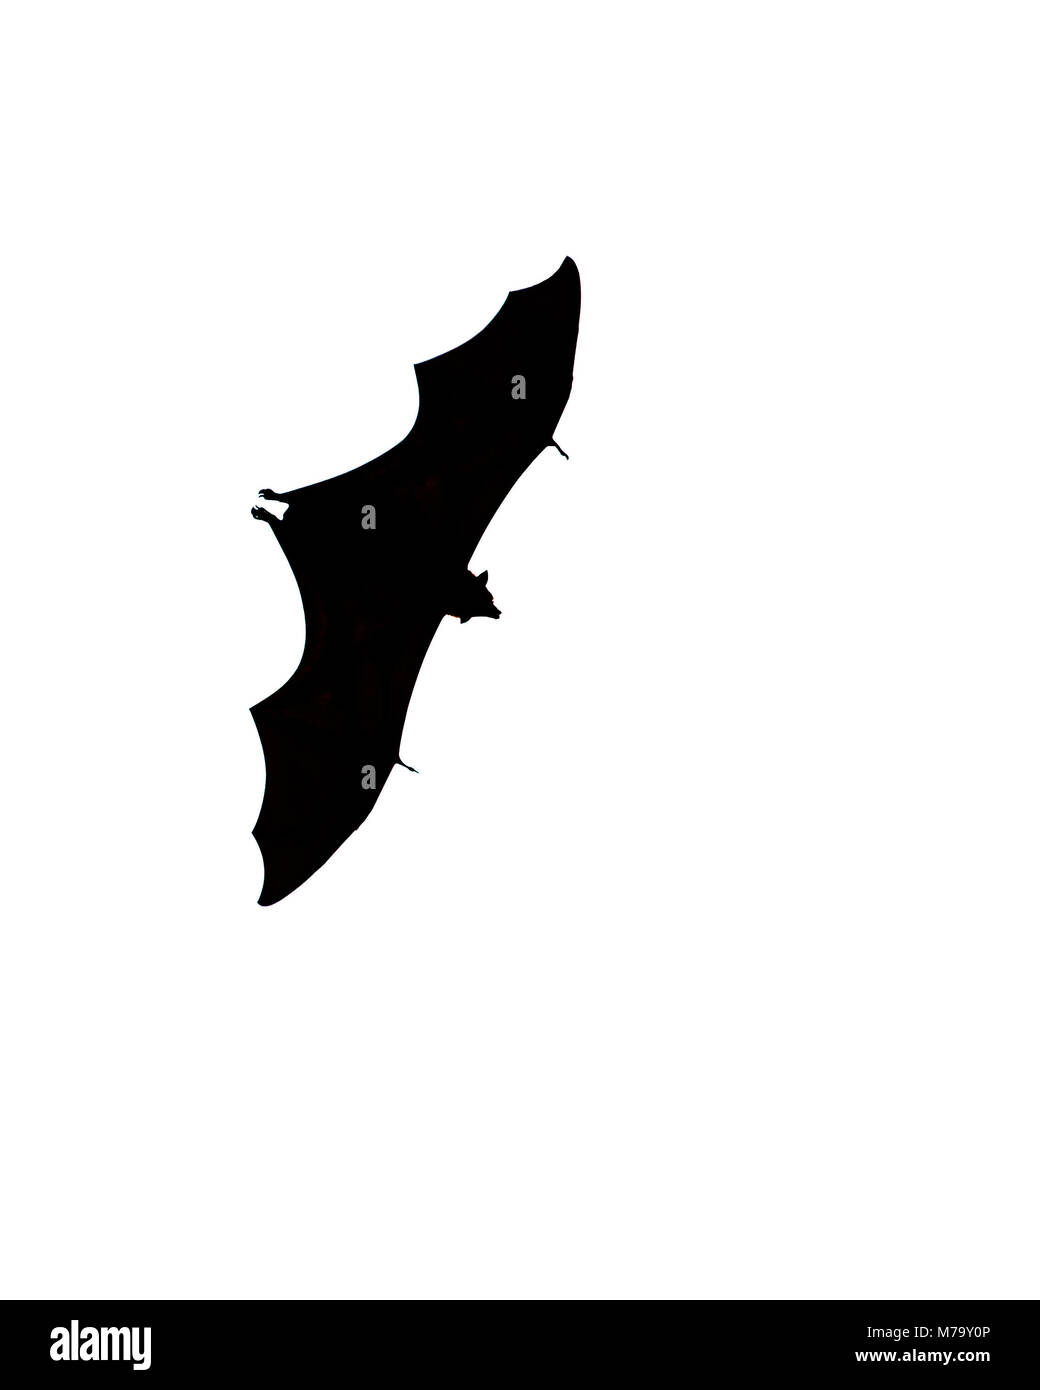 Bat flying over Tanjung Puting National Park in Borneo, Central Kalimantan province, Indonesia. Silhouette cut out isolated against white background Stock Photo